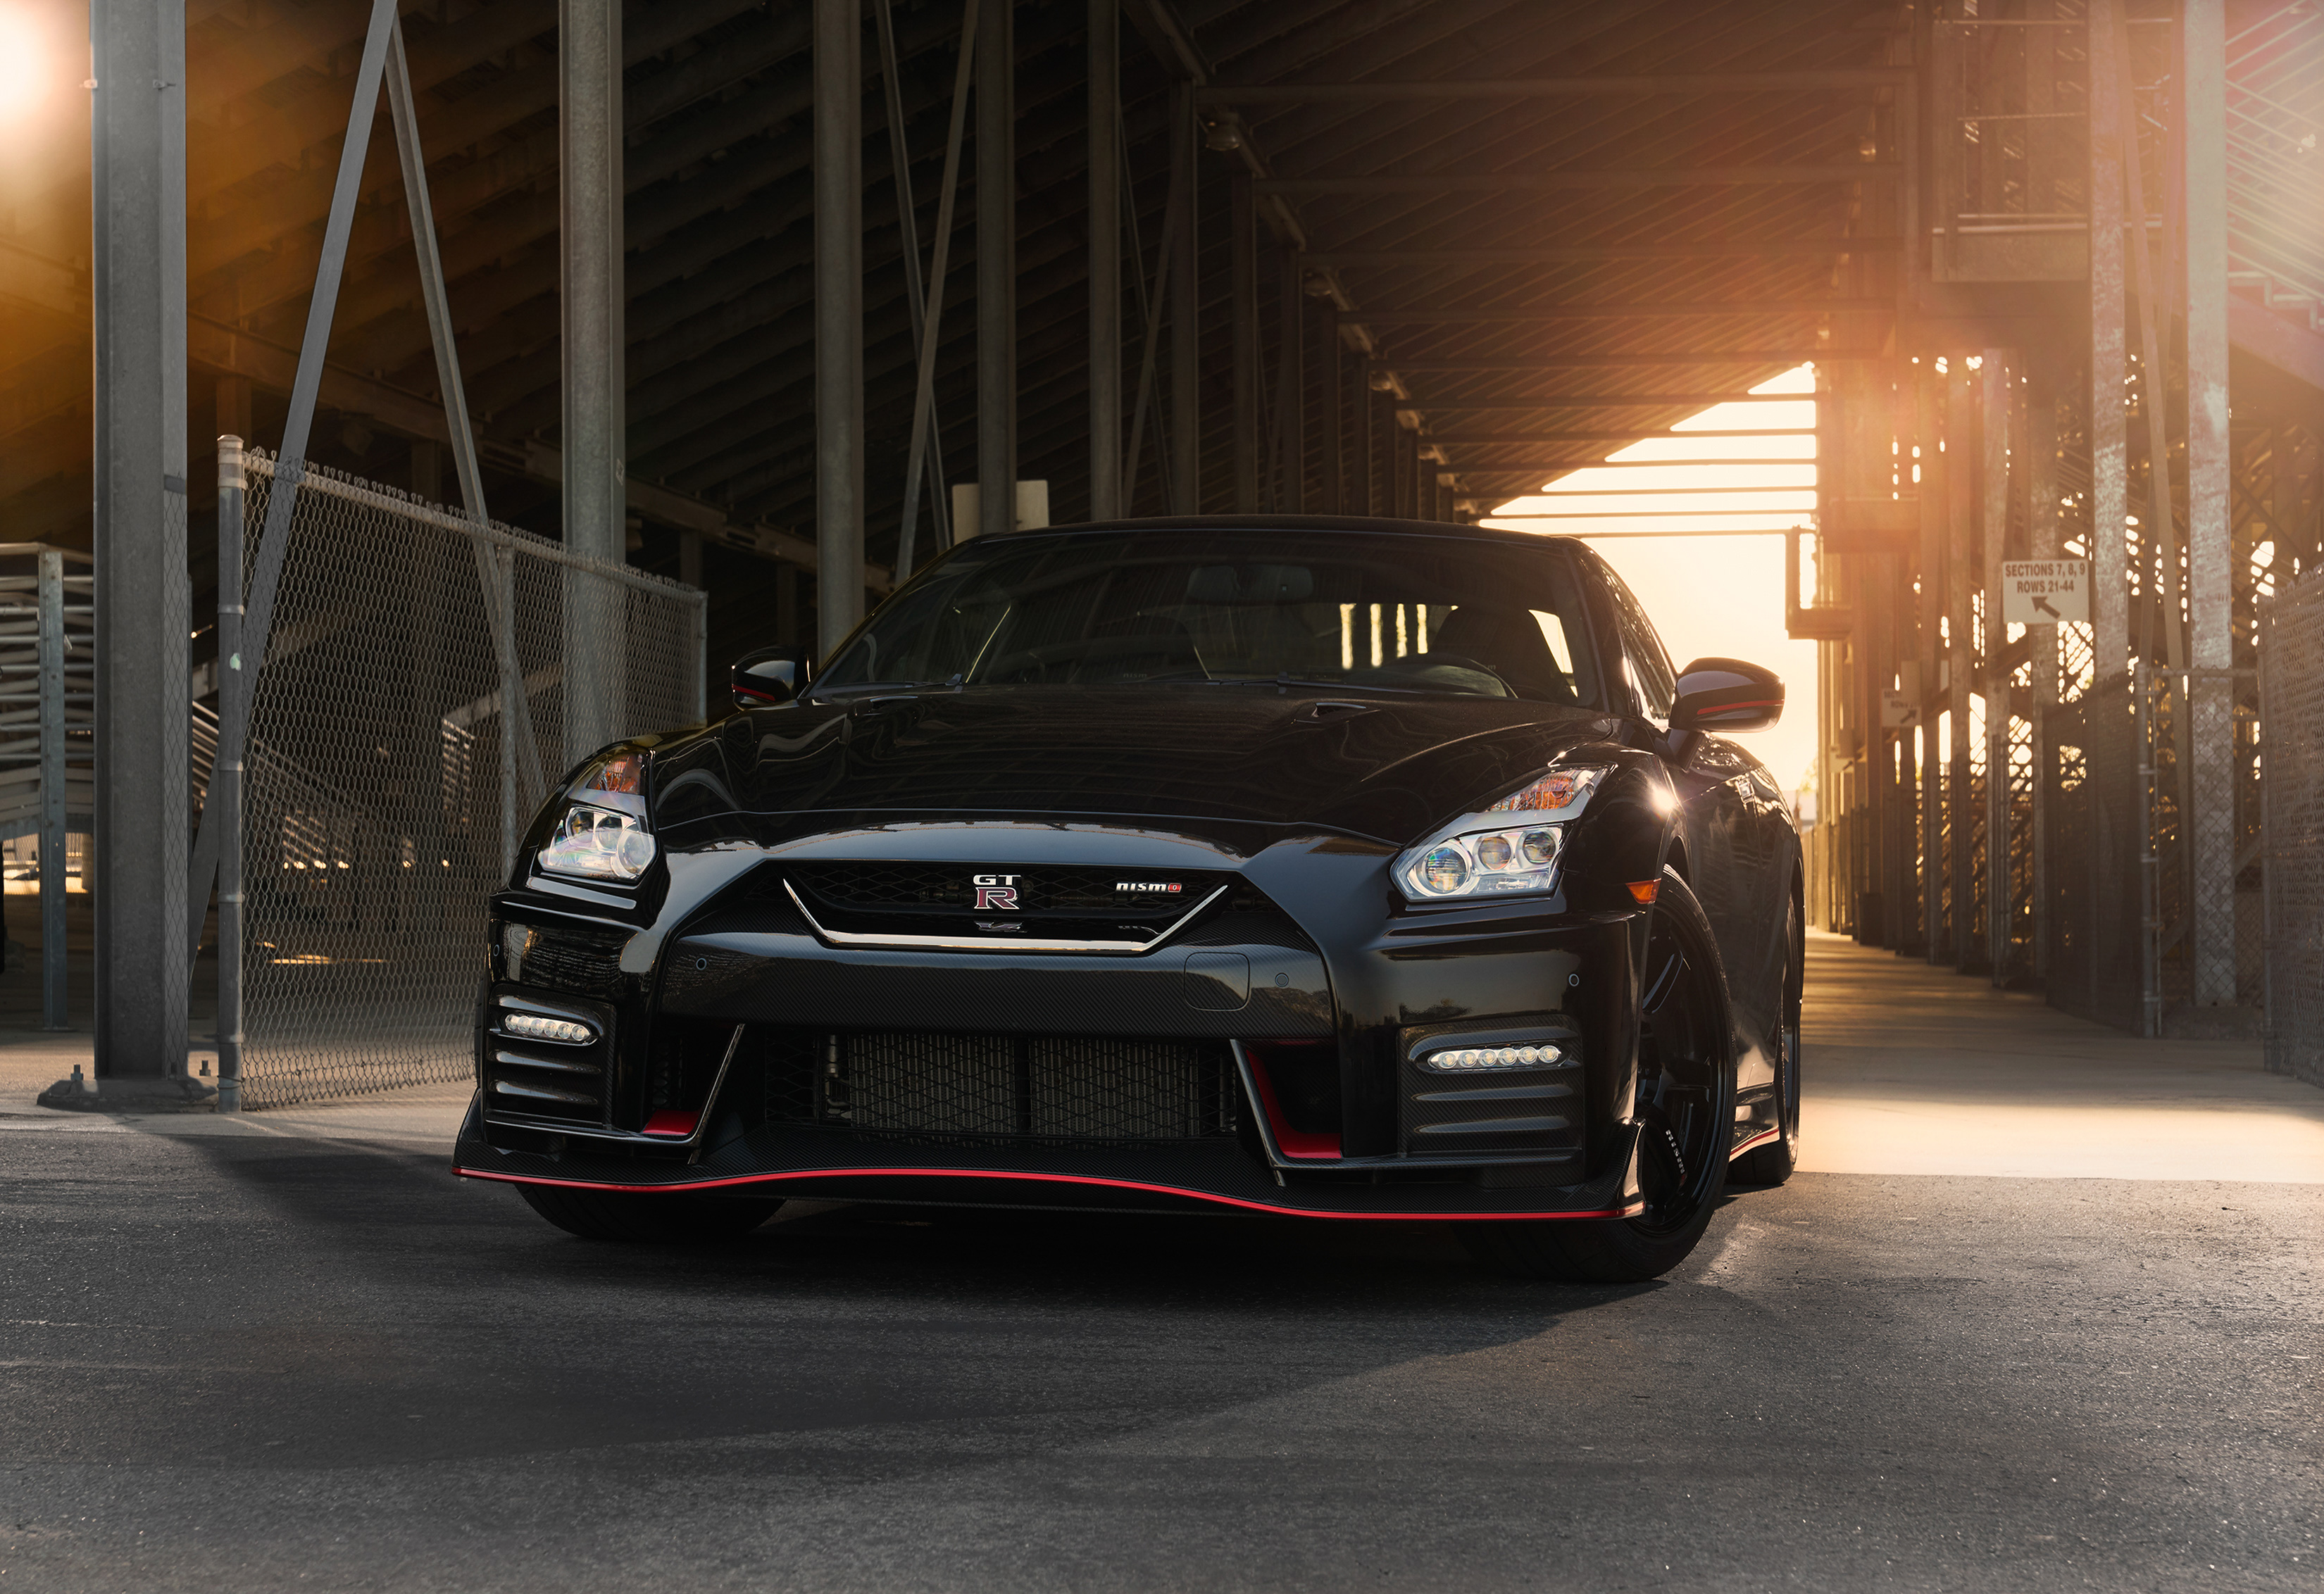 Nissan Gt-R Nismo Wallpapers